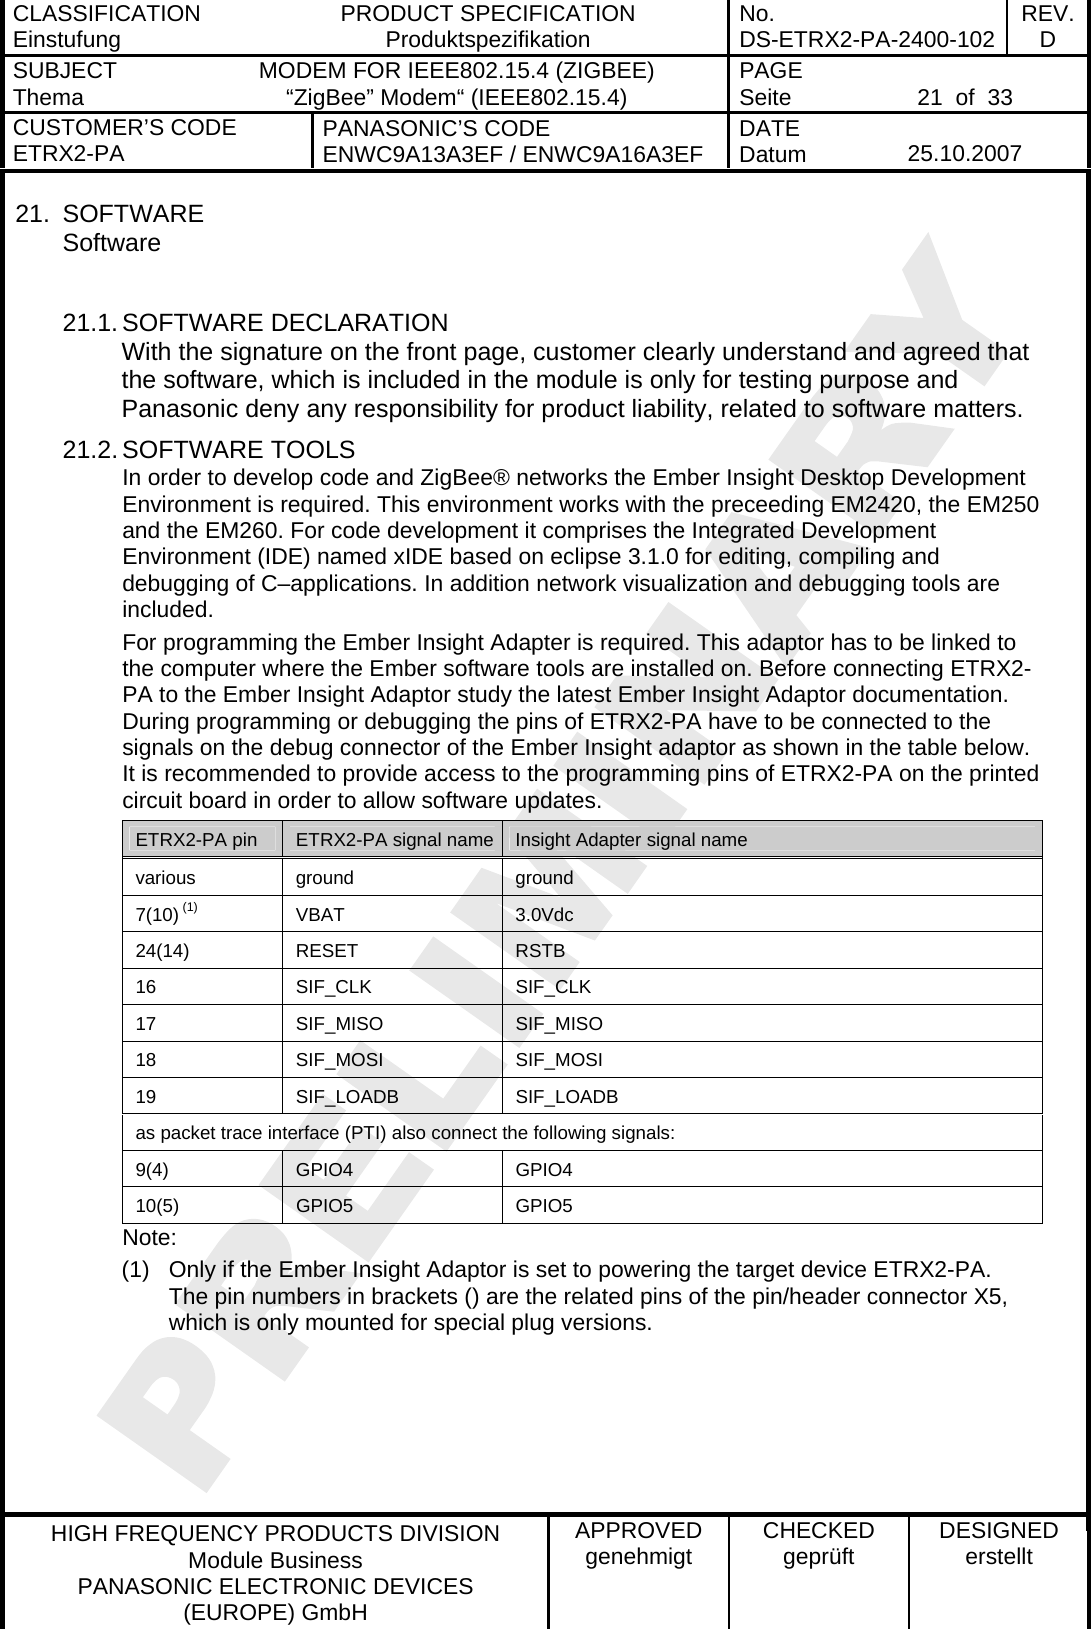 CLASSIFICATION Einstufung  PRODUCT SPECIFICATION Produktspezifikation  No. DS-ETRX2-PA-2400-102 REV.D SUBJECT Thema  MODEM FOR IEEE802.15.4 (ZIGBEE) “ZigBee” Modem“ (IEEE802.15.4)    PAGE Seite   21  of  33 CUSTOMER’S CODE ETRX2-PA  PANASONIC’S CODE ENWC9A13A3EF / ENWC9A16A3EF  DATE Datum   25.10.2007   HIGH FREQUENCY PRODUCTS DIVISION Module Business PANASONIC ELECTRONIC DEVICES  (EUROPE) GmbH APPROVED genehmigt  CHECKED geprüft  DESIGNED erstellt 21. SOFTWARE Software  21.1. SOFTWARE DECLARATION With the signature on the front page, customer clearly understand and agreed that the software, which is included in the module is only for testing purpose and Panasonic deny any responsibility for product liability, related to software matters. 21.2. SOFTWARE TOOLS In order to develop code and ZigBee® networks the Ember Insight Desktop Development Environment is required. This environment works with the preceeding EM2420, the EM250 and the EM260. For code development it comprises the Integrated Development Environment (IDE) named xIDE based on eclipse 3.1.0 for editing, compiling and debugging of C–applications. In addition network visualization and debugging tools are included. For programming the Ember Insight Adapter is required. This adaptor has to be linked to the computer where the Ember software tools are installed on. Before connecting ETRX2-PA to the Ember Insight Adaptor study the latest Ember Insight Adaptor documentation. During programming or debugging the pins of ETRX2-PA have to be connected to the signals on the debug connector of the Ember Insight adaptor as shown in the table below. It is recommended to provide access to the programming pins of ETRX2-PA on the printed circuit board in order to allow software updates. ETRX2-PA pin  ETRX2-PA signal name Insight Adapter signal name various ground  ground 7(10) (1) VBAT 3.0Vdc 24(14) RESET  RSTB 16 SIF_CLK  SIF_CLK 17 SIF_MISO SIF_MISO 18 SIF_MOSI SIF_MOSI 19 SIF_LOADB SIF_LOADB as packet trace interface (PTI) also connect the following signals: 9(4) GPIO4  GPIO4 10(5) GPIO5  GPIO5 Note: (1)  Only if the Ember Insight Adaptor is set to powering the target device ETRX2-PA. The pin numbers in brackets () are the related pins of the pin/header connector X5, which is only mounted for special plug versions.  